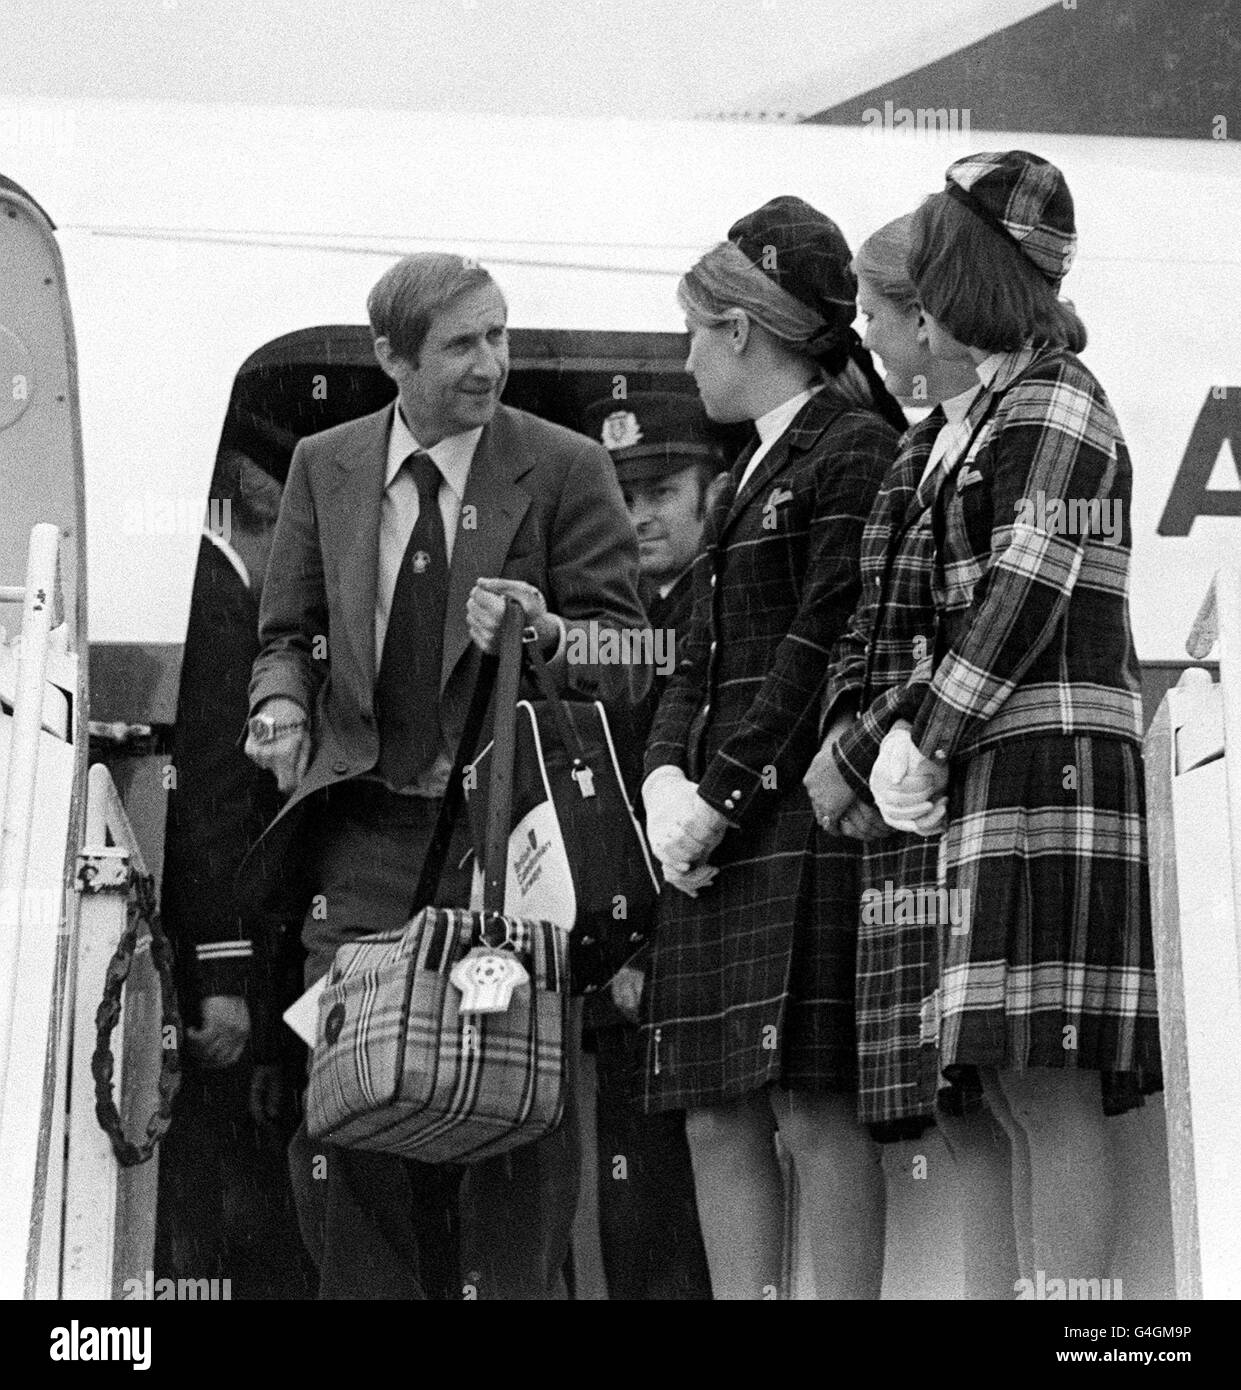 PA NEWS PHOTO 15/6/78: SCOTLAND INTERNATIONAL MANAGER ALLY MCCLOUD LEAVING THE PLANE AT LONDON'S GATWICK AIRPORT AFTER THEIR RETURN FROM THE WORLD CUP TOURNAMENT IN ARGENTINA AFTER BEING KNOCKED OUT BY THE HOST NATION Stock Photo